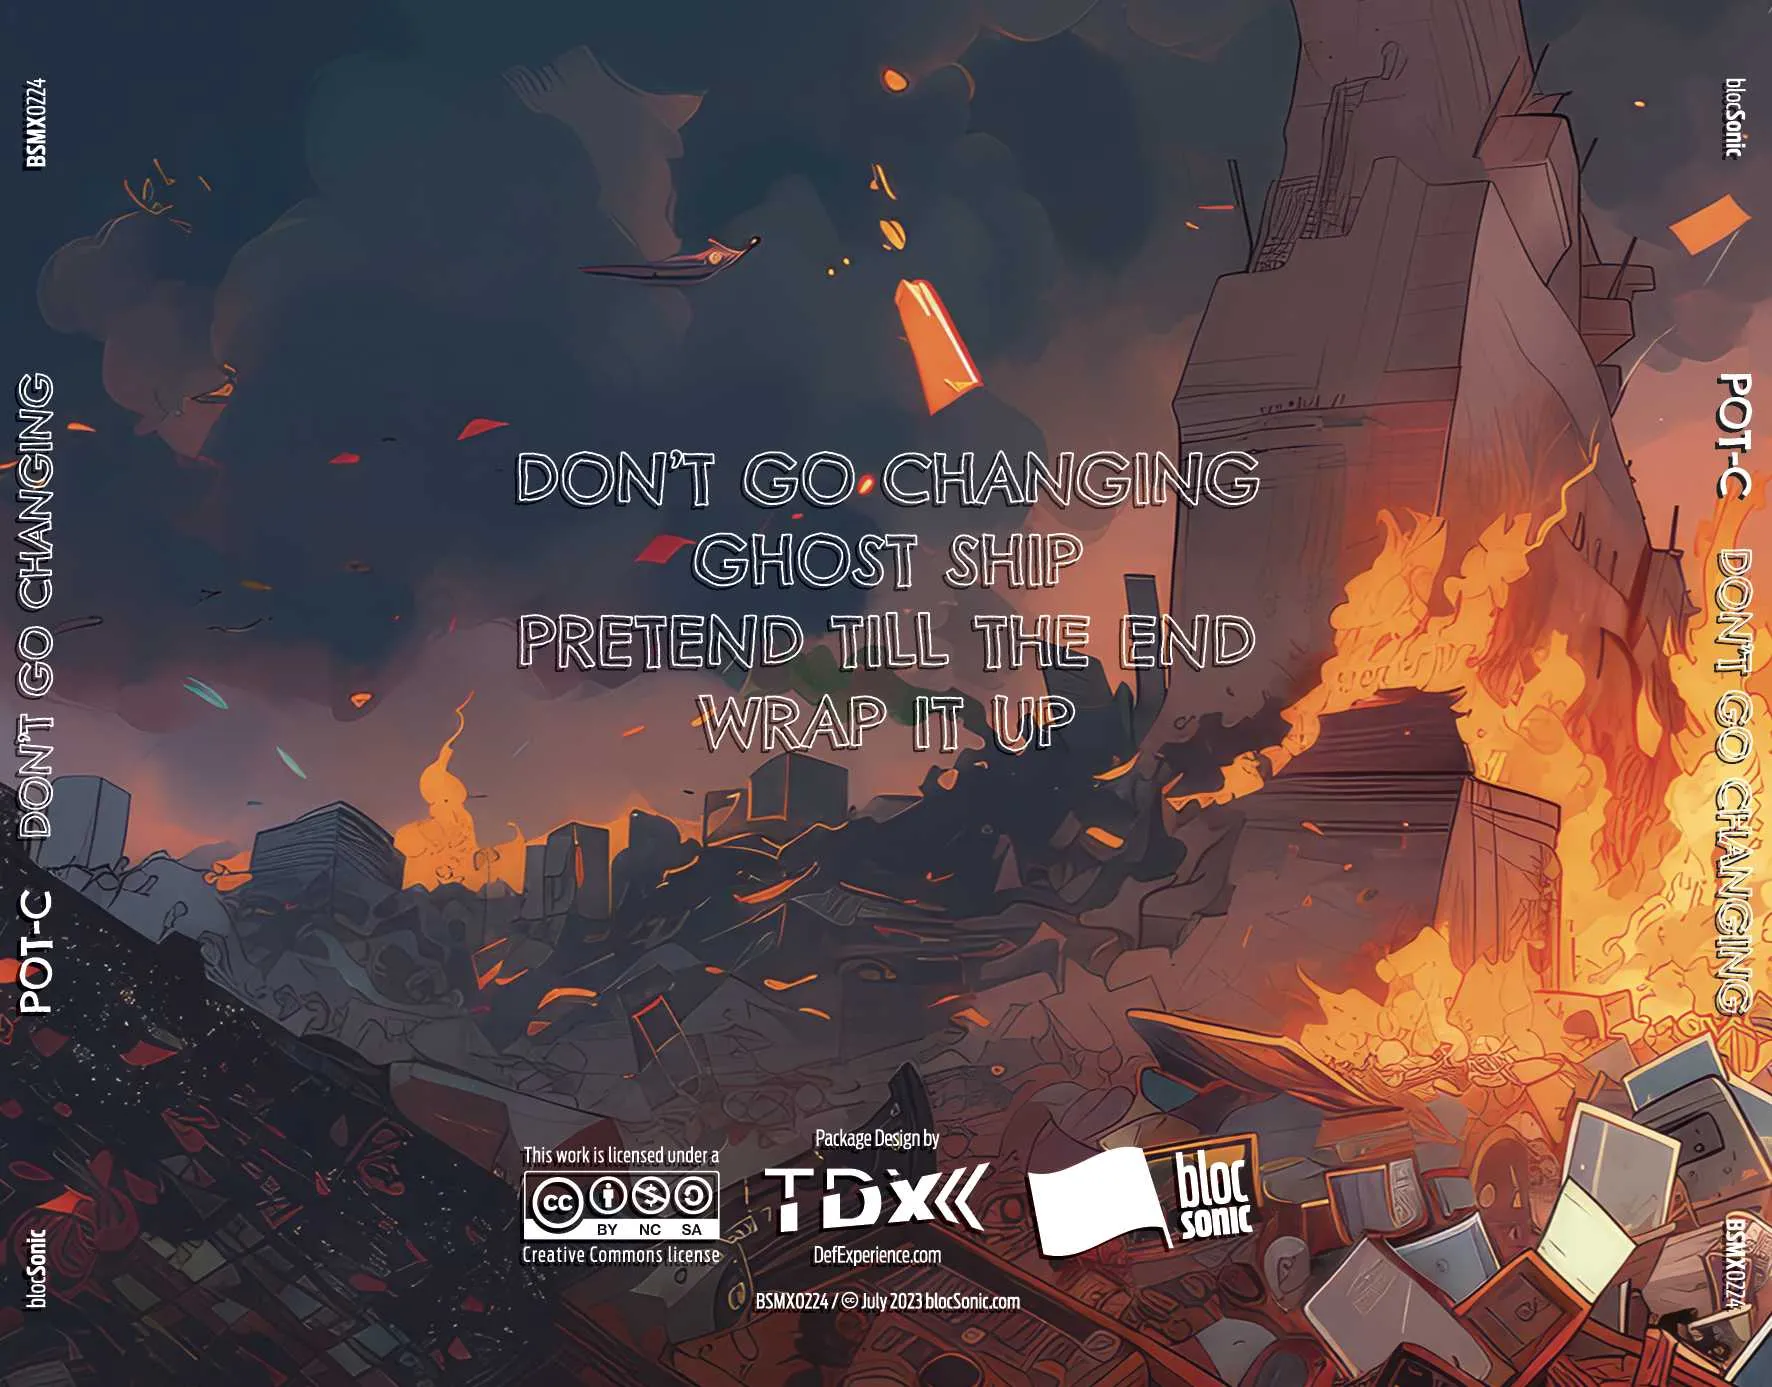 Album traycard for “Don't Go Changing” by Pot-C